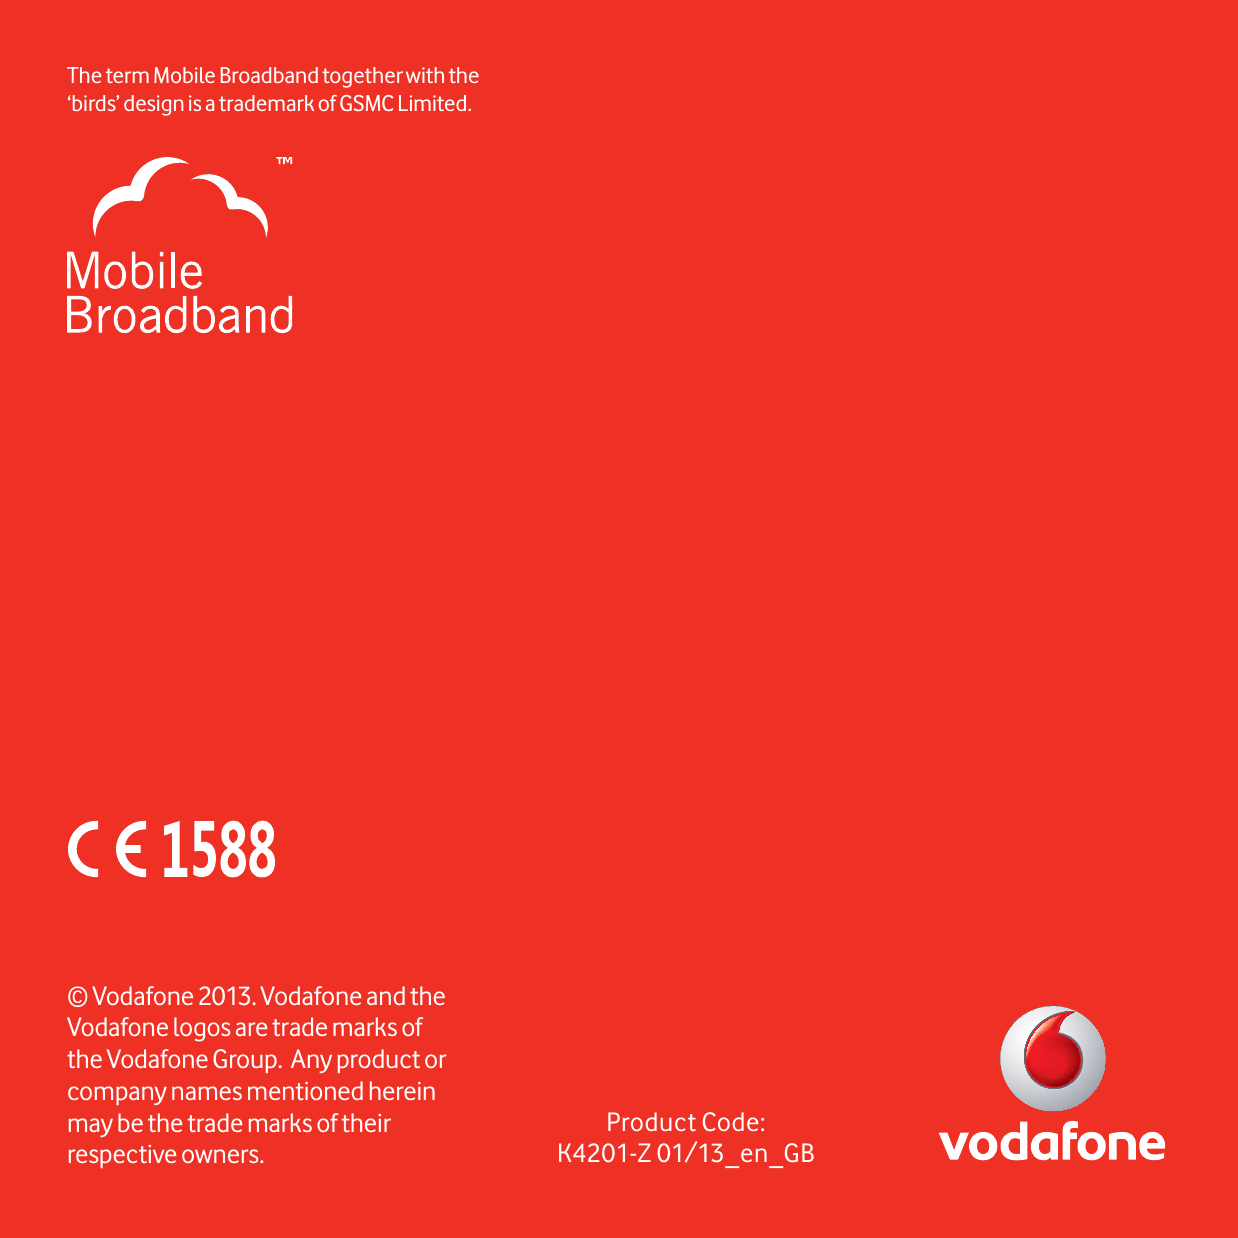 Product Code:K4201-Z 01/13_en_GB© Vodafone 2013. Vodafone and the Vodafone logos are trade marks of the Vodafone Group.  Any product or company names mentioned herein may be the trade marks of their respective owners.The term Mobile Broadband together with the ‘birds’ design  is a trademark of GSMC Limited.